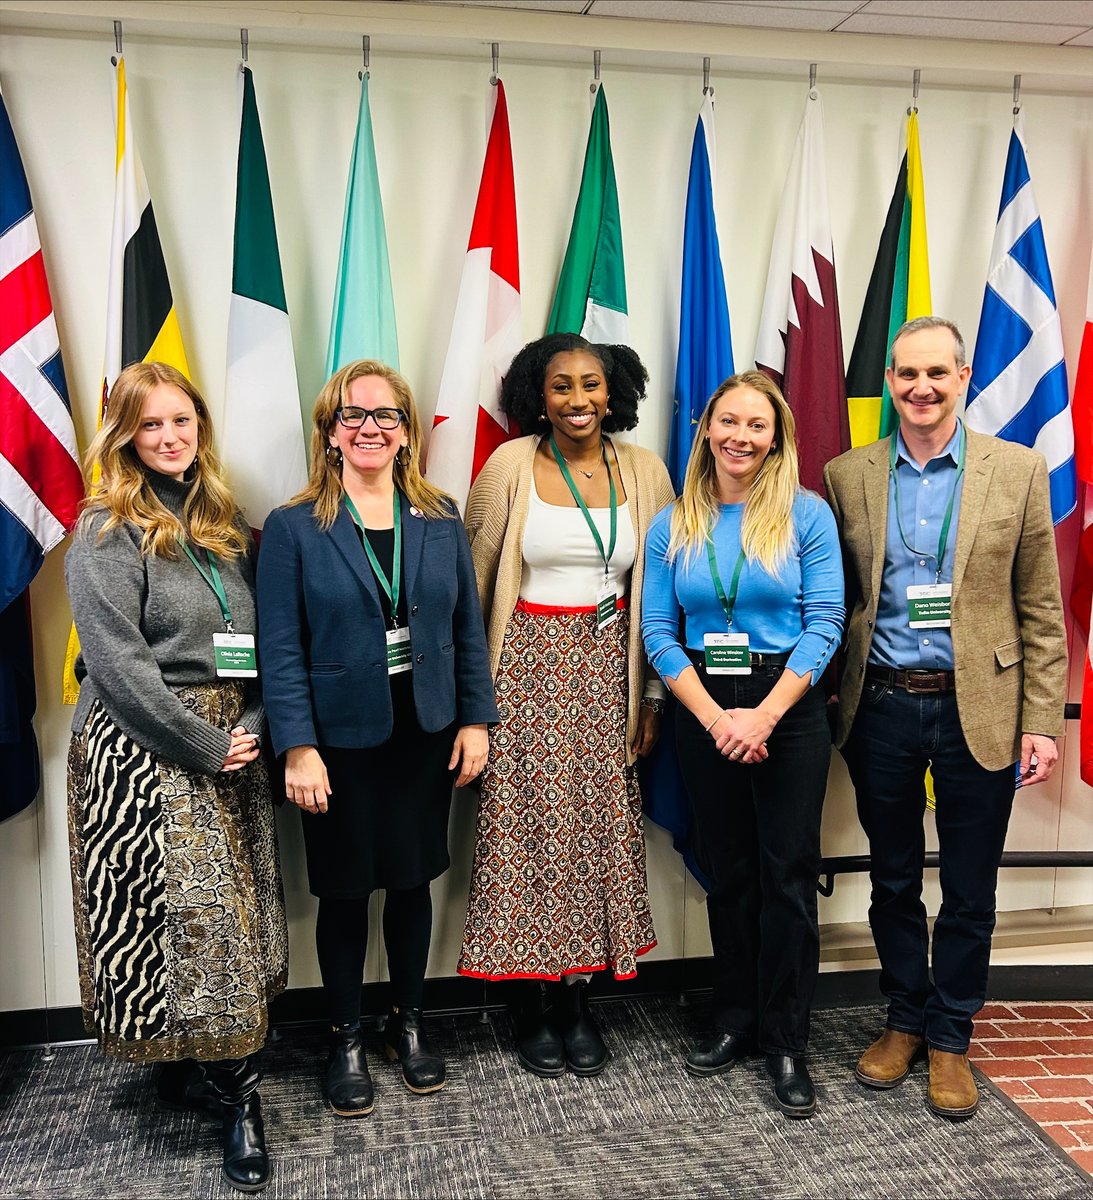 Leaders from a variety of backgrounds, including IGS Executive Director @Enviro_Rebecca, discussed the gap between #GreenEnergy innovation and real-world implementation at a panel @TuftsEnergyConf. Thank you to the panelists for an informative conversation.